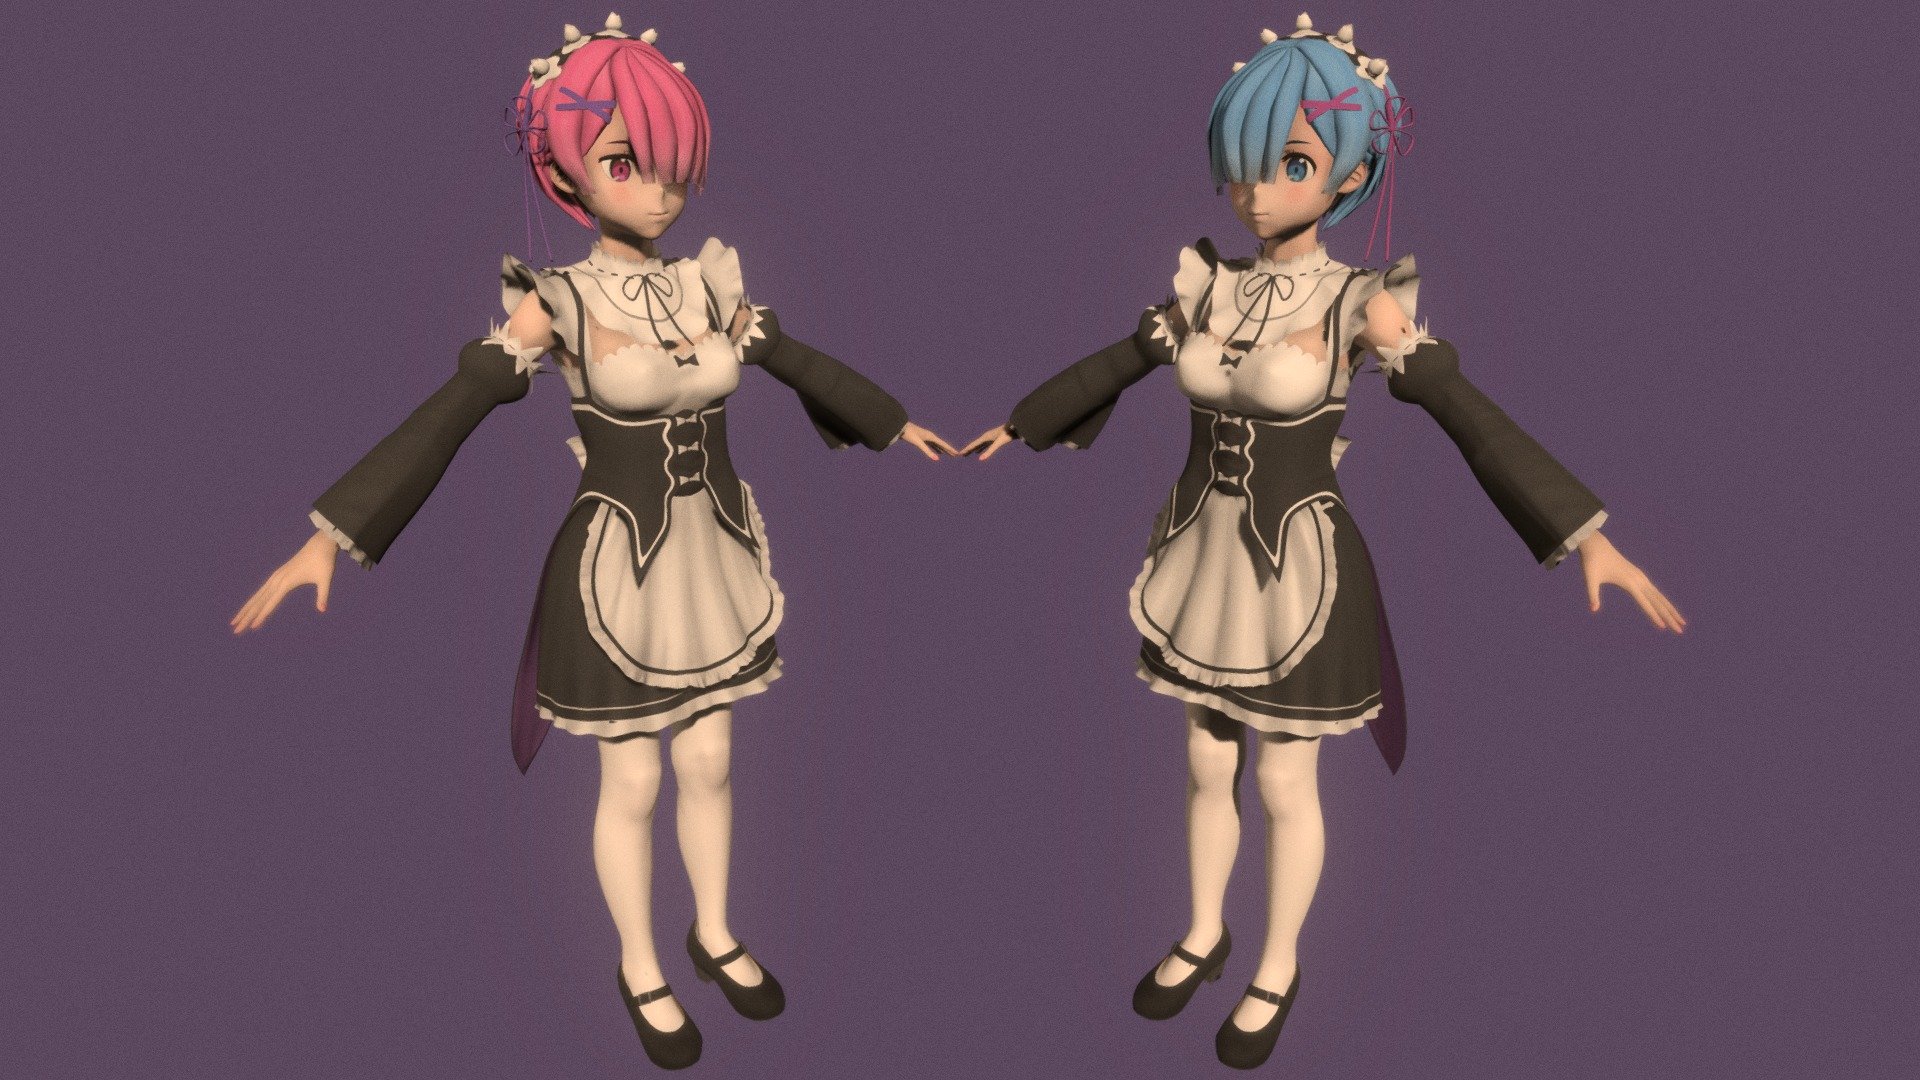 T-pose rigged model of anime girl Rem &amp; Ram (Re:Zero − Starting Life in Another World).

Body and clothings are rigged and skinned by 3ds Max CAT system.

Eye direction and facial animation controlled by Morpher modifier / Shape Keys / Blendshape.

This product include .FBX (ver. 7200) and .MAX (ver. 2010) files.

3ds Max version is turbosmoothed to give a high quality render (as you can see here).

Original main body mesh have ~7.000 polys.

This 3D model may need some tweaking to adapt the rig system to games engine and other platforms.

I support convert model to various file formats (the rig data will be lost in this process): 3DS; AI; ASE; DAE; DWF; DWG; DXF; FLT; HTR; IGS; M3G; MQO; OBJ; SAT; STL; W3D; WRL; X.

You can buy all of my models in one pack to save cost: https://sketchfab.com/3d-models/all-of-my-anime-girls-c5a56156994e4193b9e8fa21a3b8360b

And I can make commission models.

If you have any questions, please leave a comment or contact me via my email 3d.eden.project@gmail.com 3d model